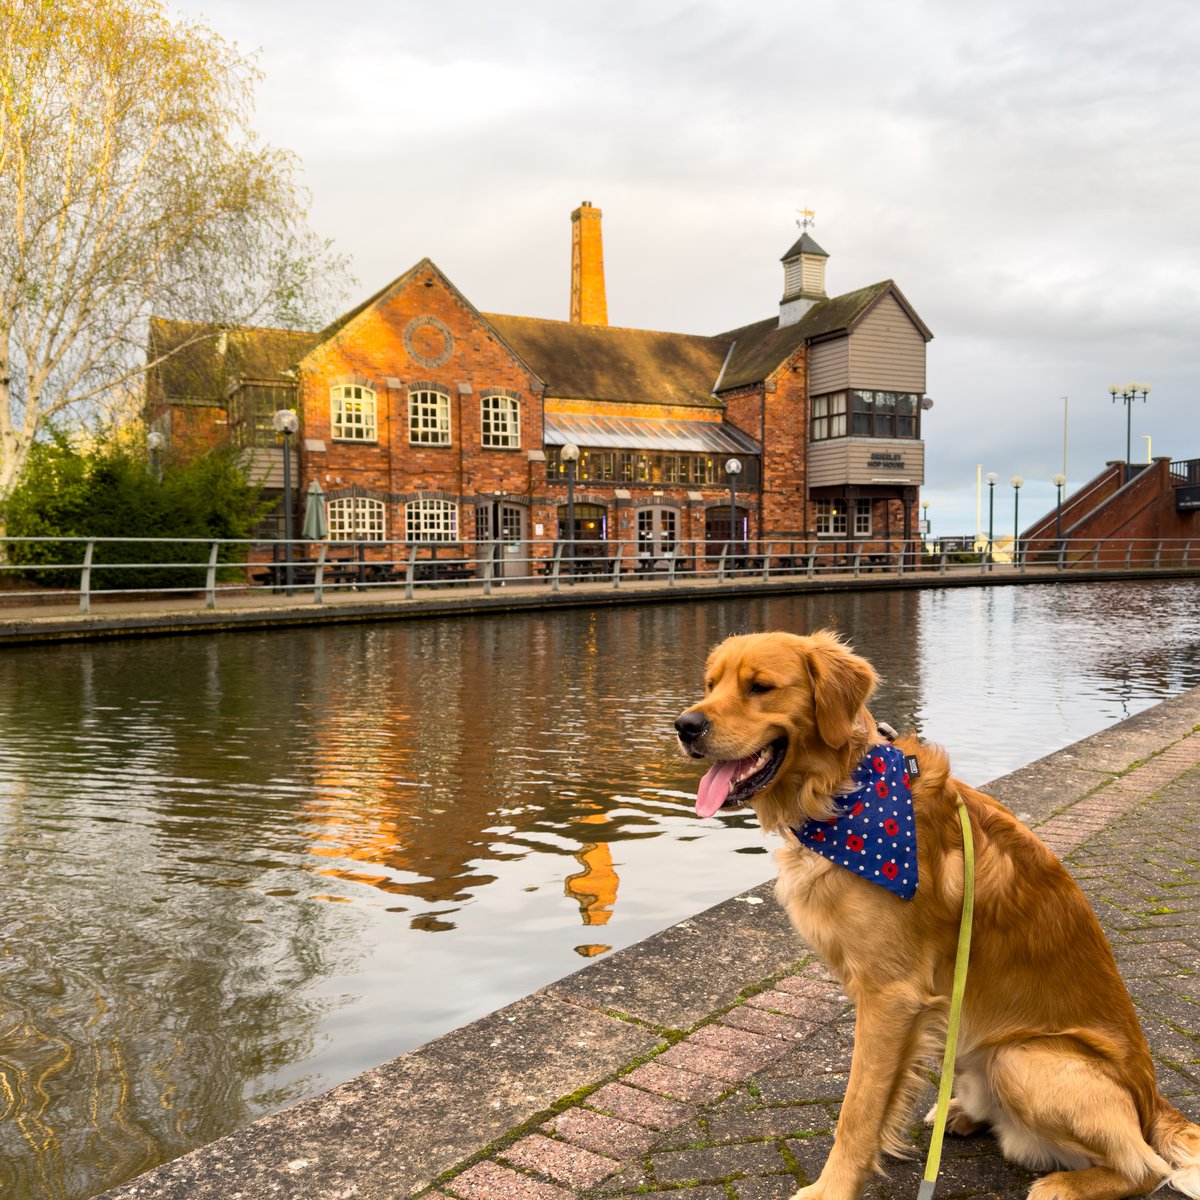 Finlay #RedMoonshine at the @brierleyhophouse on #DudleyNo1Canal #BoatsThatTweet #KeepCanalsAlive #LifesBetterByWater #FundBritainsWaterways #HopHouse #Bankss #TongueOut #TowpathWalks #Canals #Canalsandrivers #HistoricBuildings redmoonshine.com